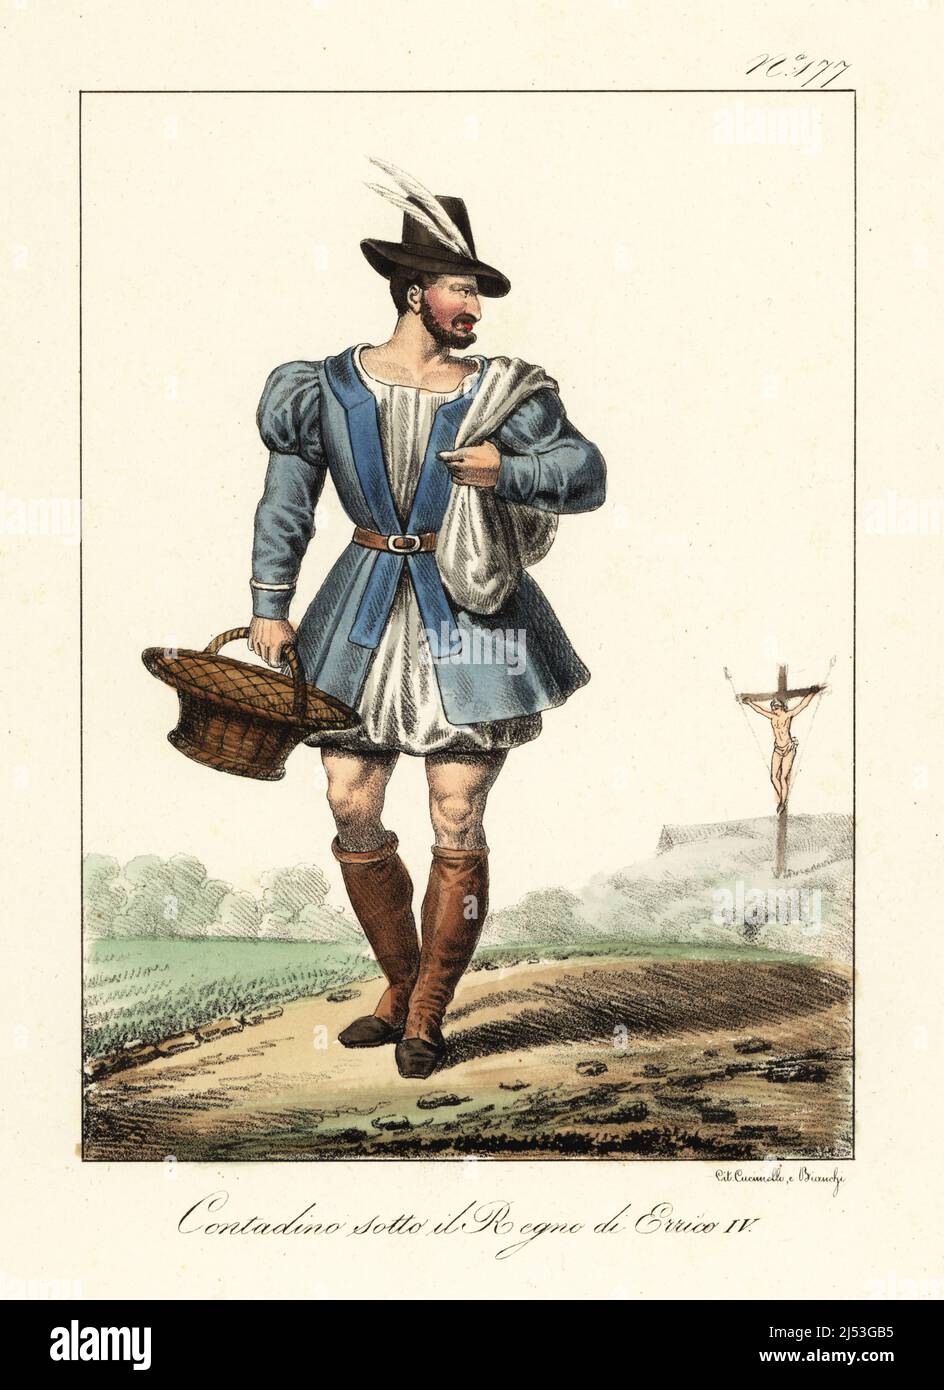 French peasant man in the reign of King Henry IV. In cap with feathers, doublet, shirt, breeches, boots. Looking at a man crucified on a hillside during the French Wars of Religion. Paysan sous le Regne de Henry IV. Handcoloured lithograph by Lorenzo Bianchi and Domenico Cuciniello after Hippolyte Lecomte from Costumi civili e militari della monarchia francese dal 1200 al 1820, Naples, 1825. Italian edition of Lecomte’s Civilian and military costumes of the French monarchy from 1200 to 1820. Stock Photo